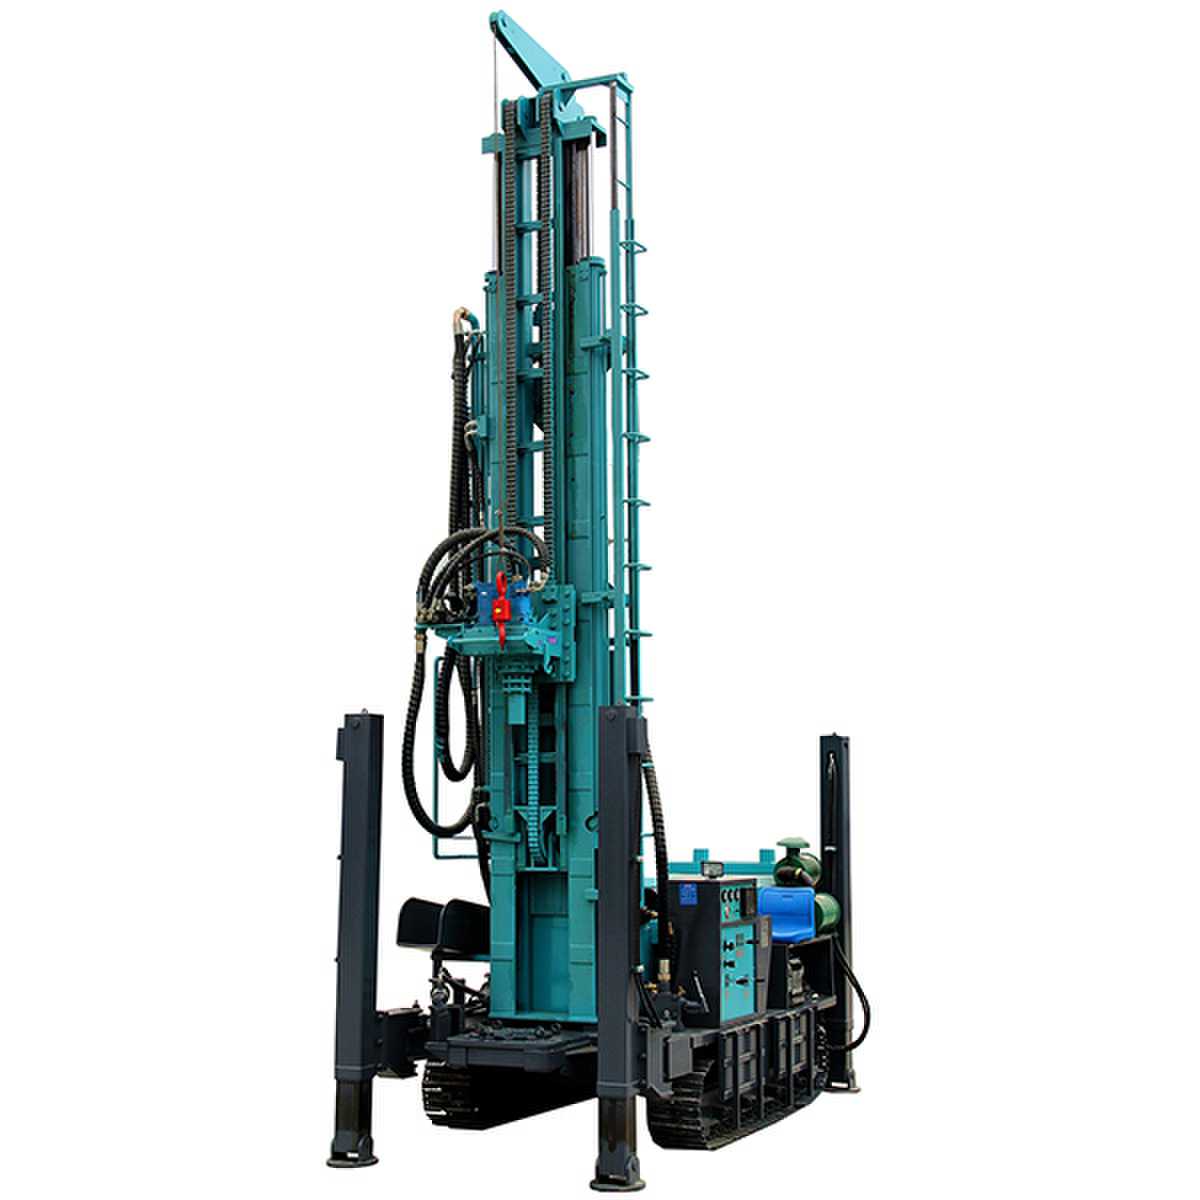 FY450 water well drilling rig specificafion